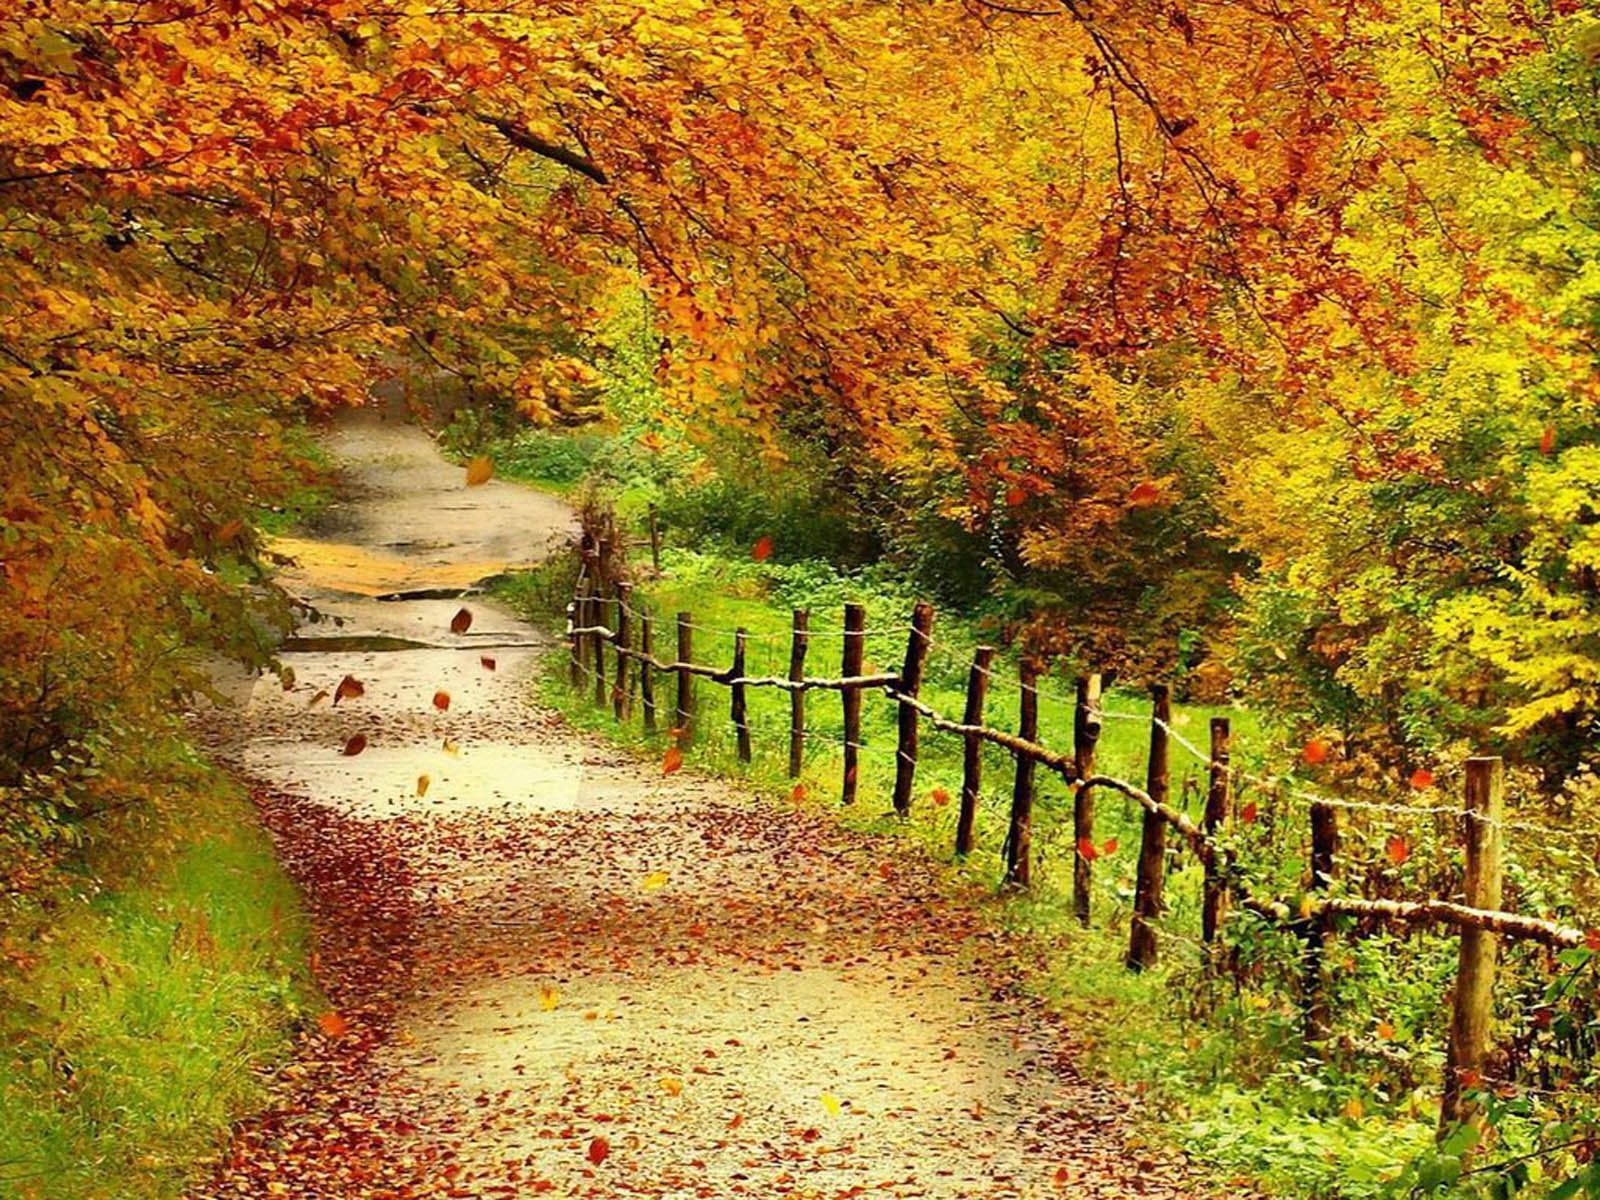 Tag Beautiful Autumn Scenery Wallpapers Backgrounds Photos Images 1600x1200